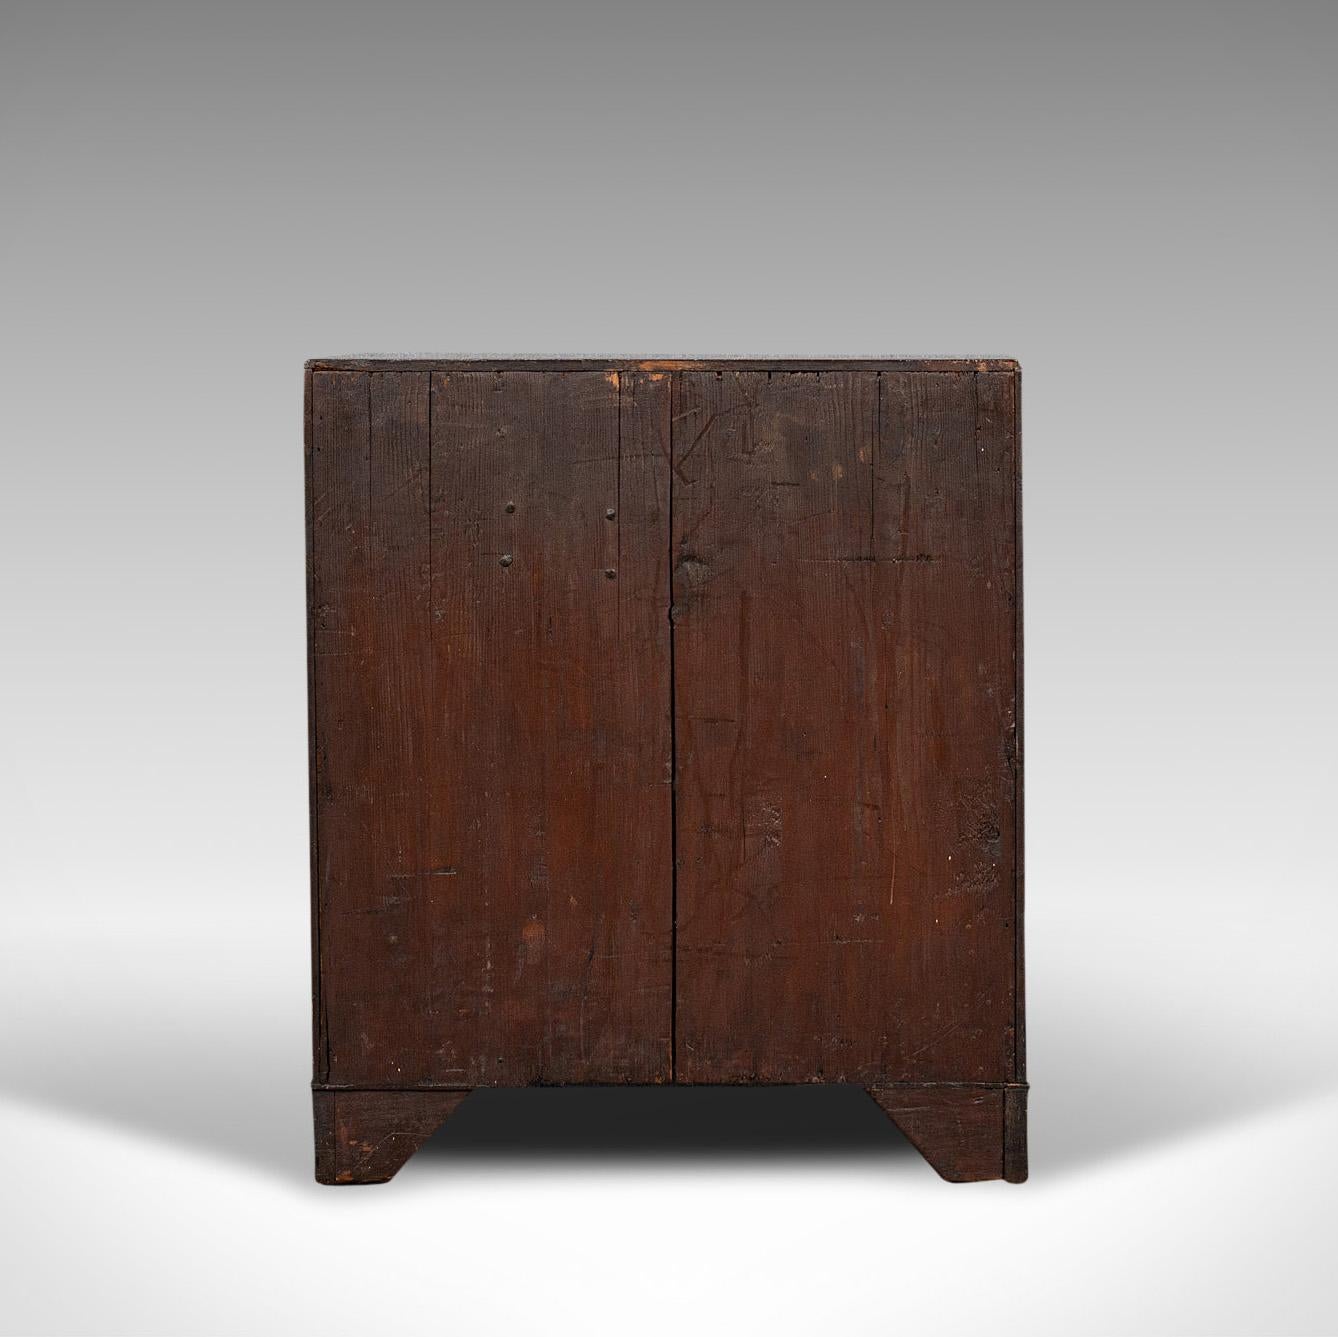 18th Century Compact Antique Chest of Drawers, English, Mahogany, Bedside Stand, Georgian